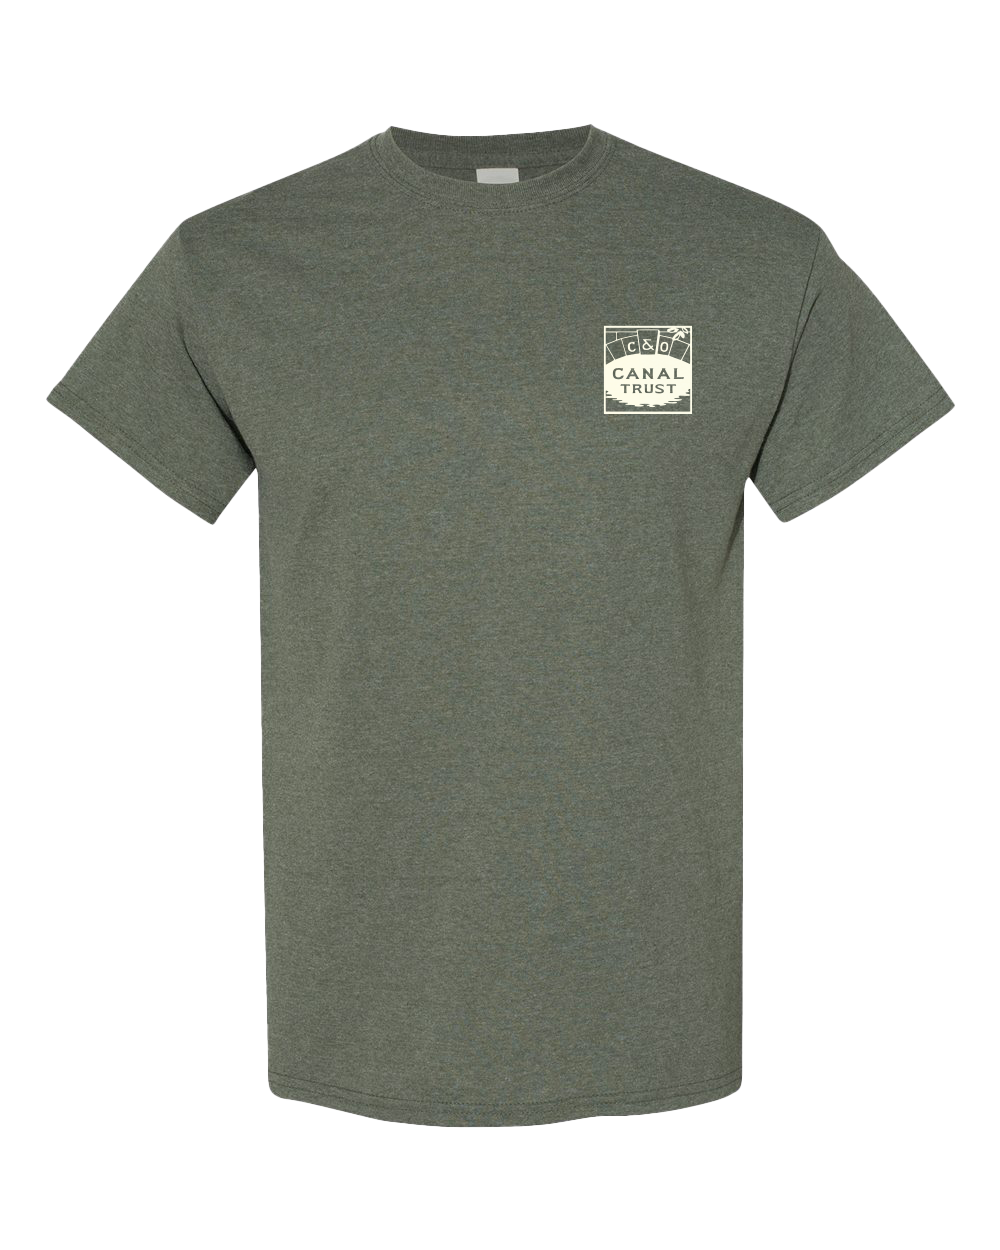 *PRE-ORDER* C&O Canal Recreate Responsibly (Green) / Shirt - ESTIMATED SHIP DATE 7/10